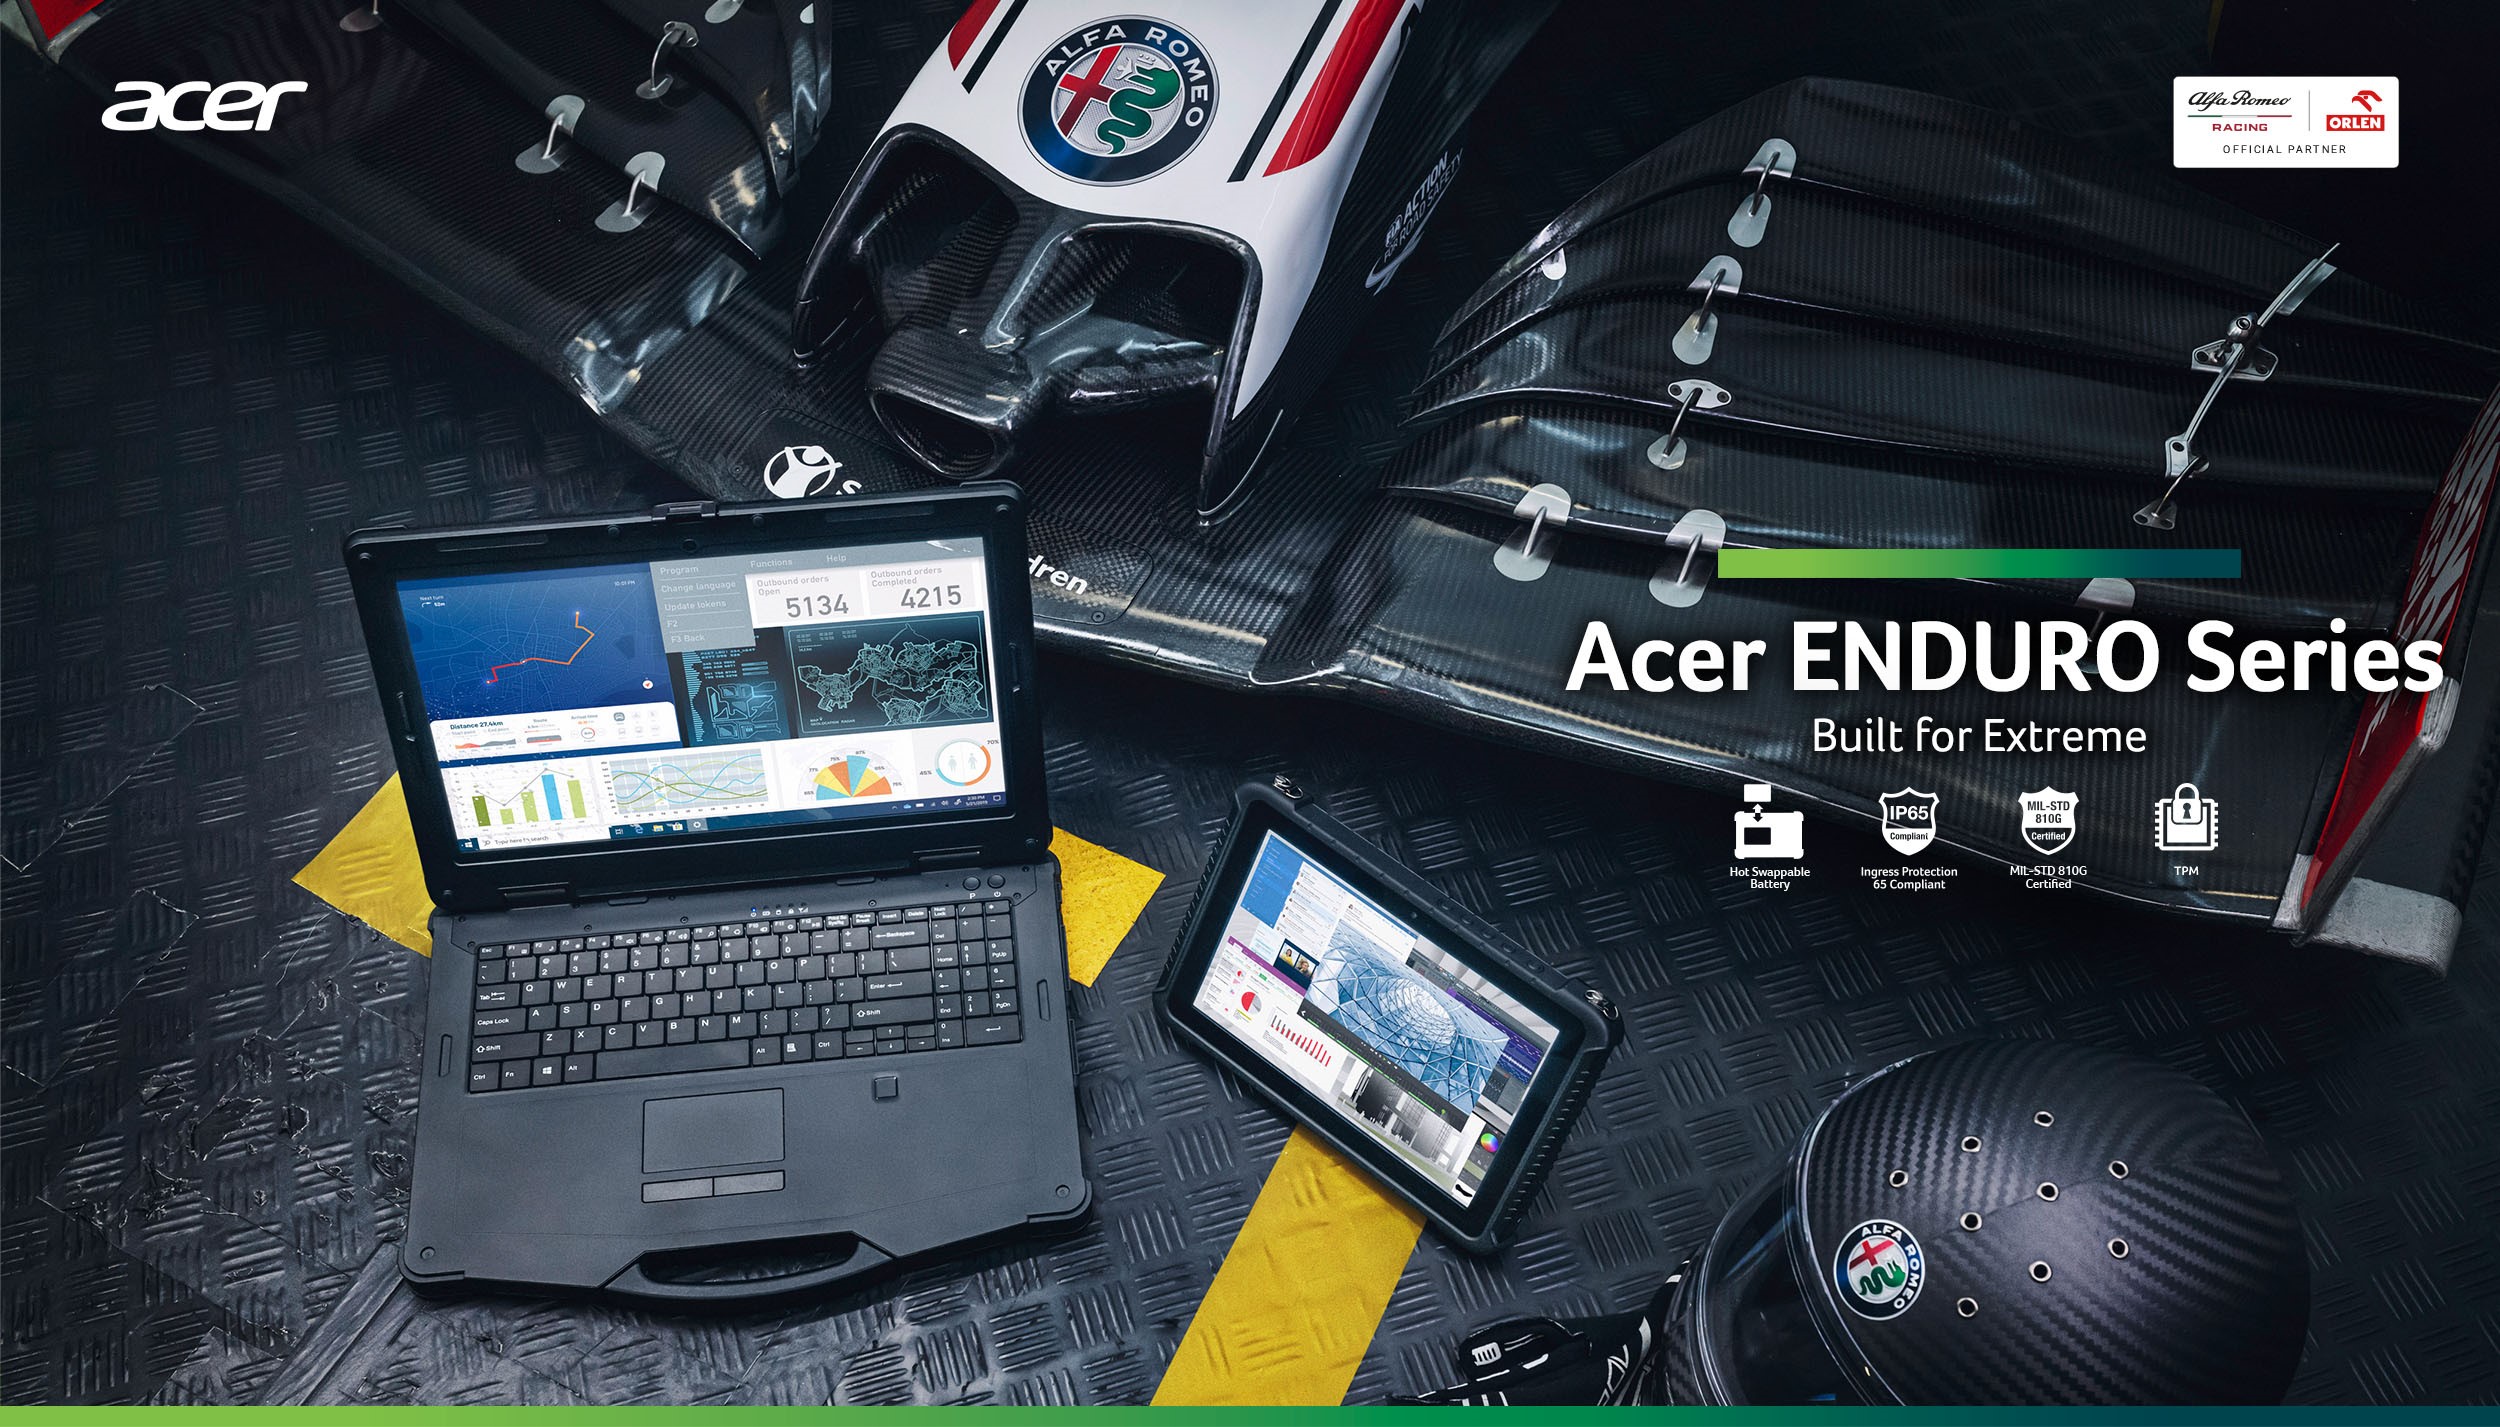 Built for Extreme with Acer ENDURO